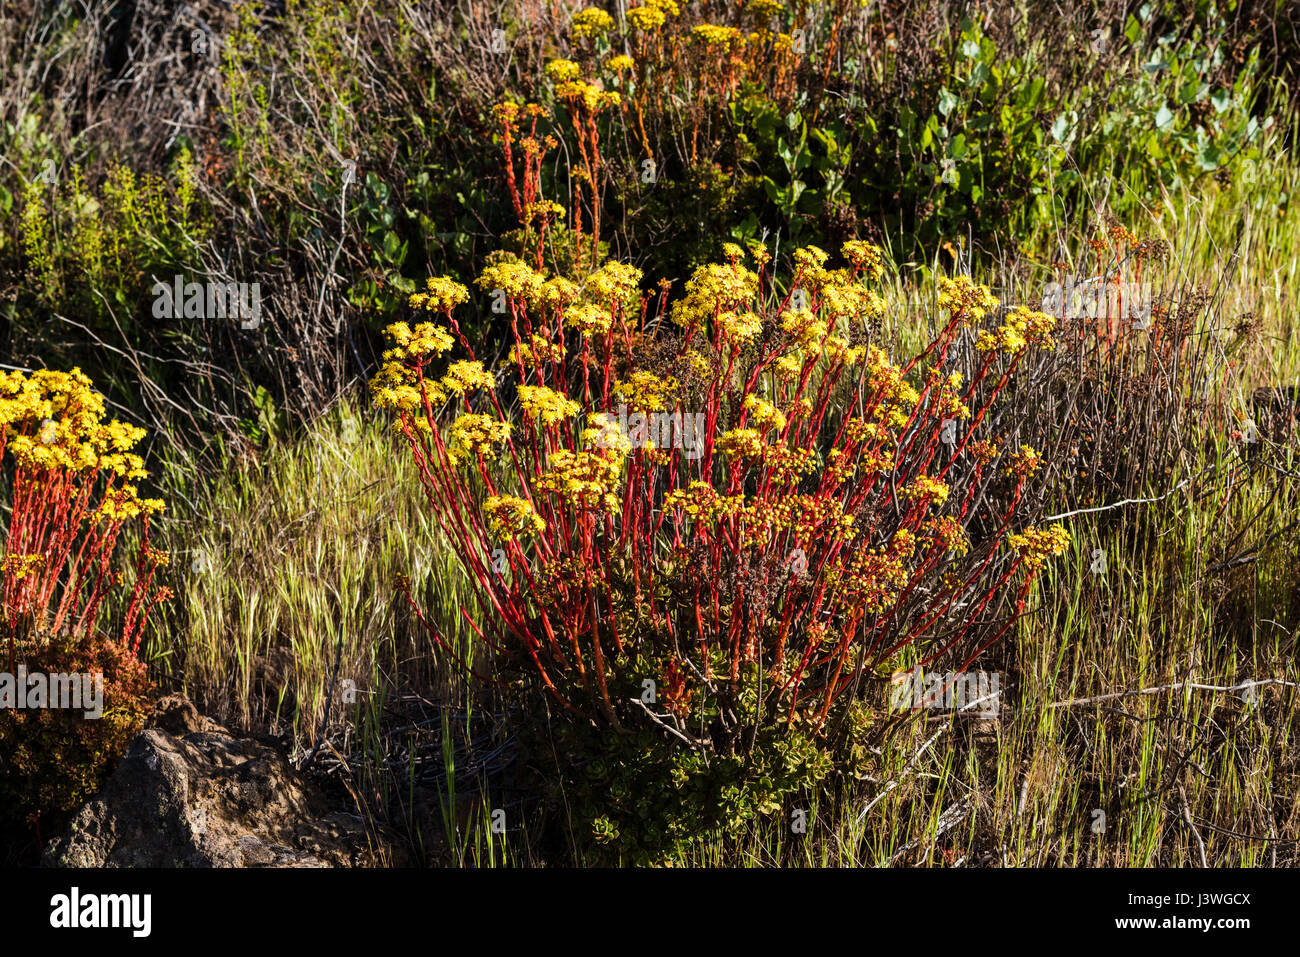 Aeonium spathulatum (bejequillo canario, houseleek, stonecrop), a Canarian endemic, flowering in springtime at Chinyero, Tenerife, Canary Islands Stock Photo